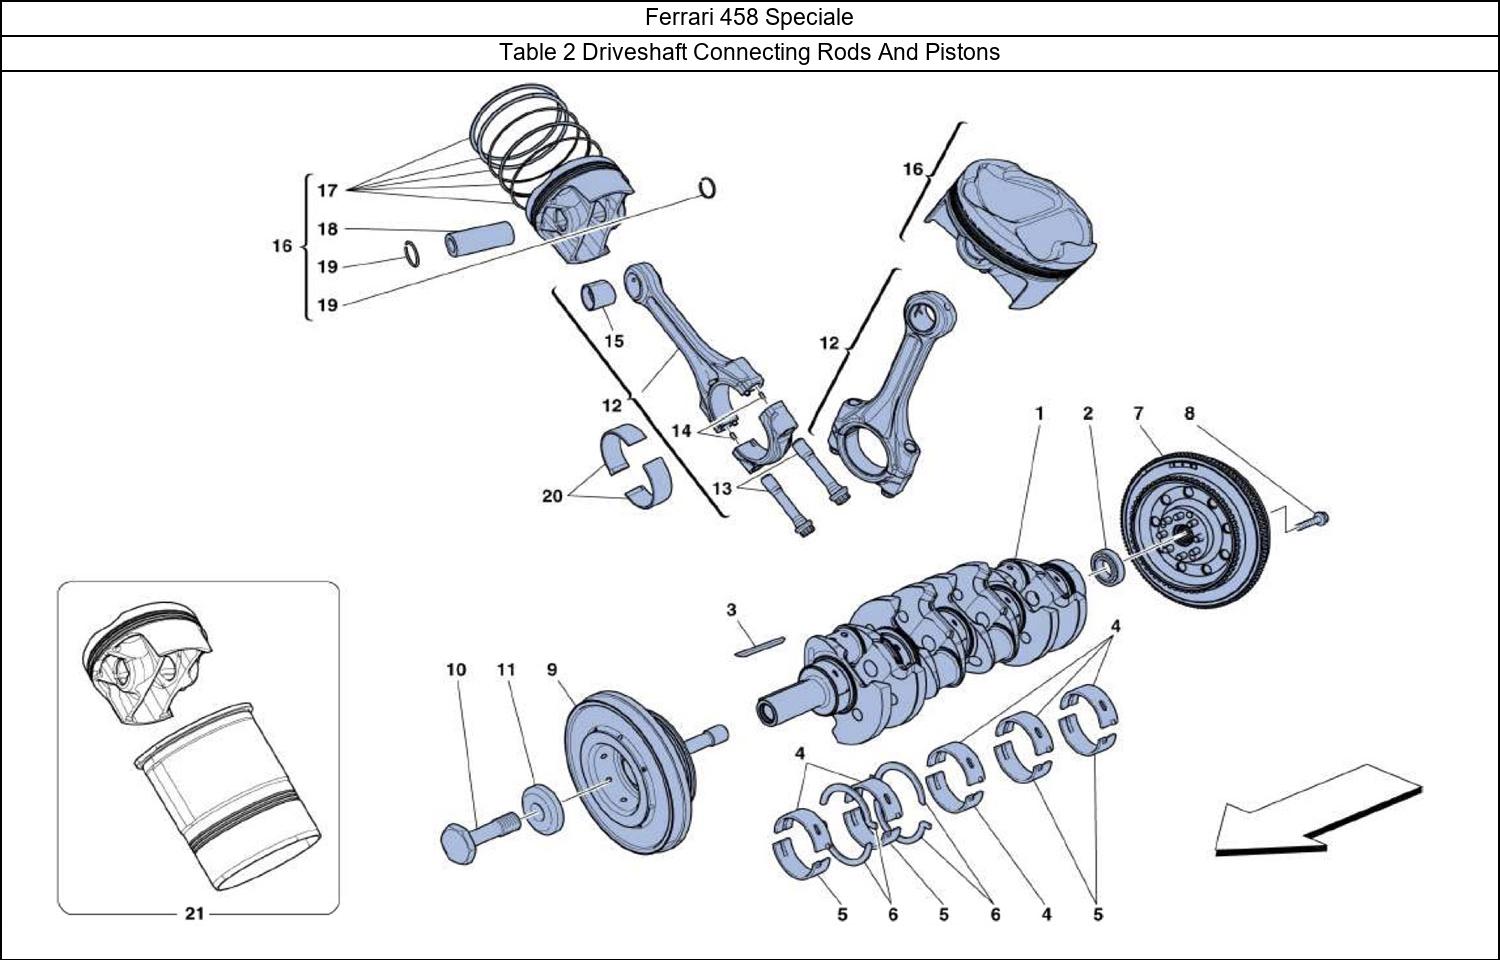 Ferrari Parts Ferrari 458 Speciale Table 2 Driveshaft Connecting Rods And Pistons